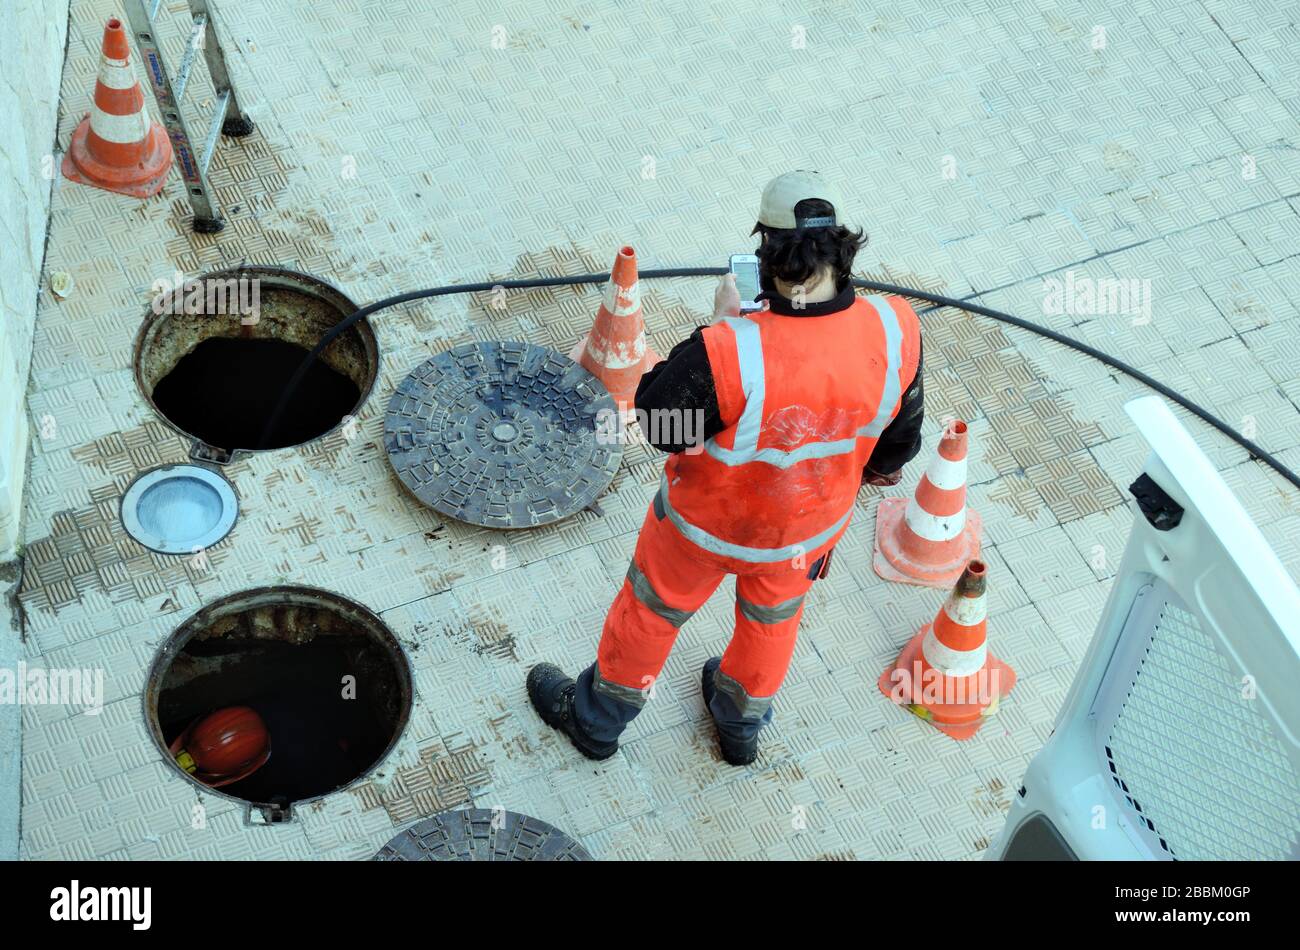 A Sewer Worker with Uncovered Manhole Covers or Drain Covers Prepares for Work on Underground Sewers, Drains or Drain Works Stock Photo